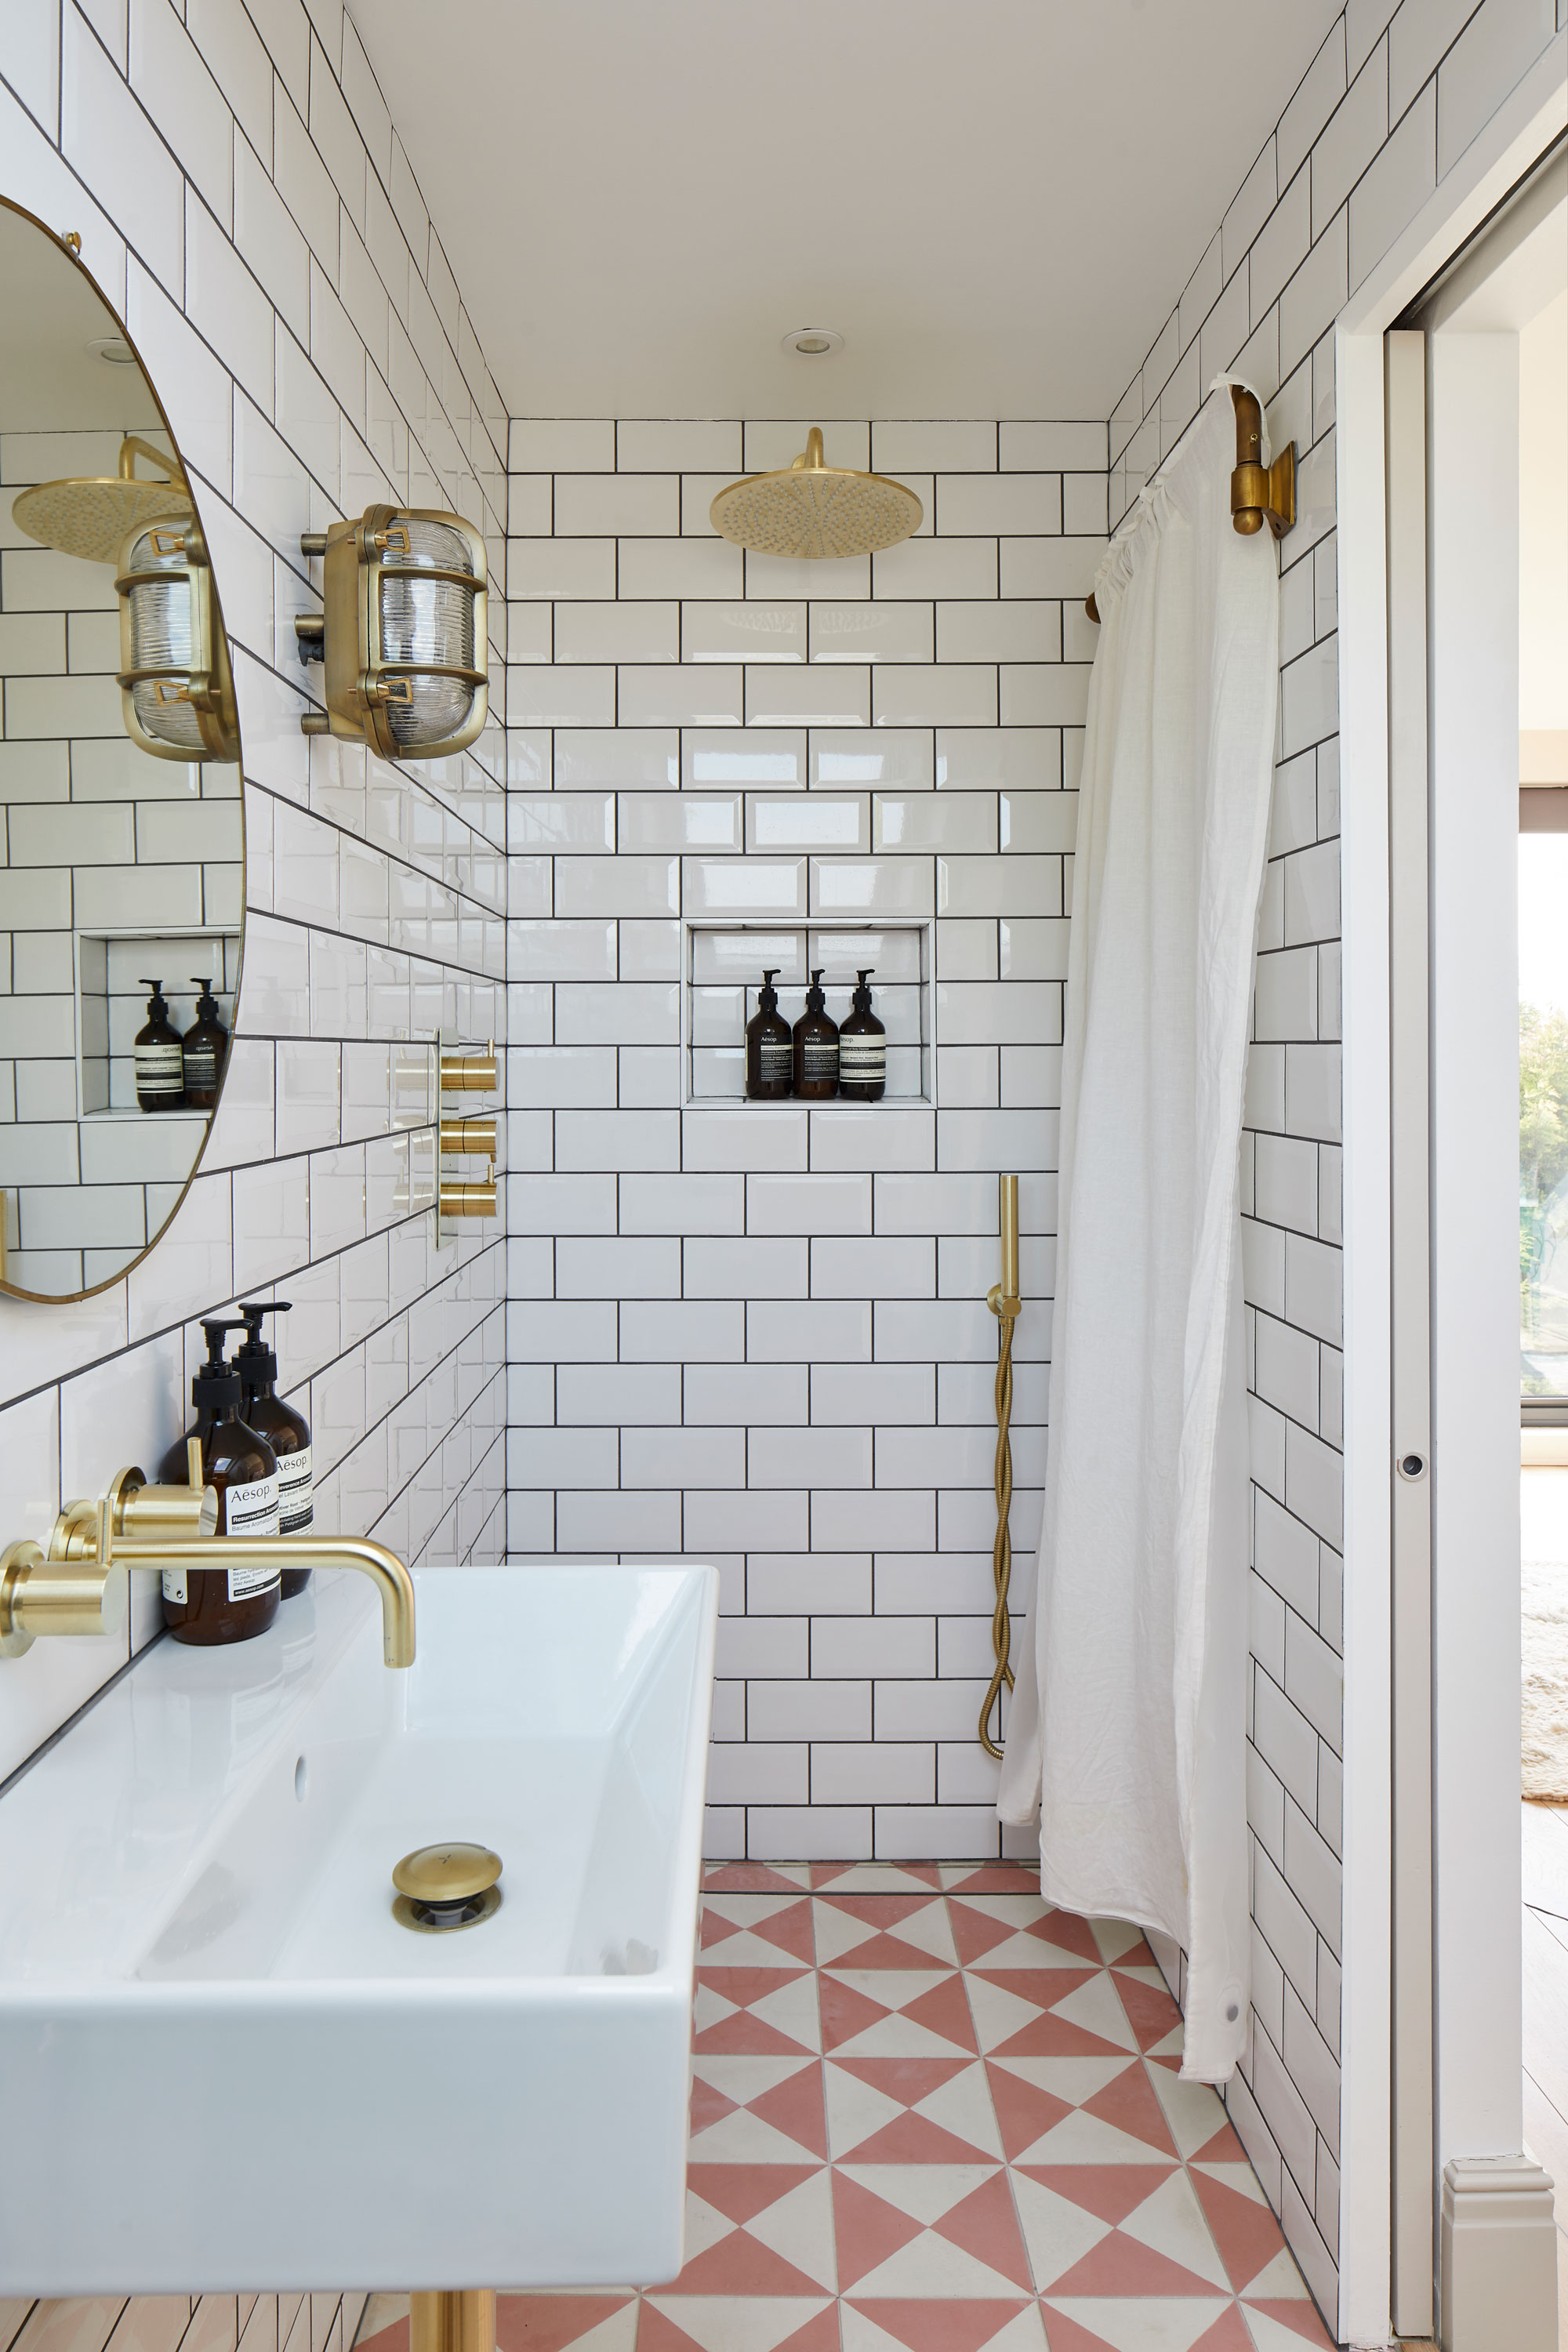 How To Tile A Wall Perfect The Look, How To Cover Tile Walls In Bathroom